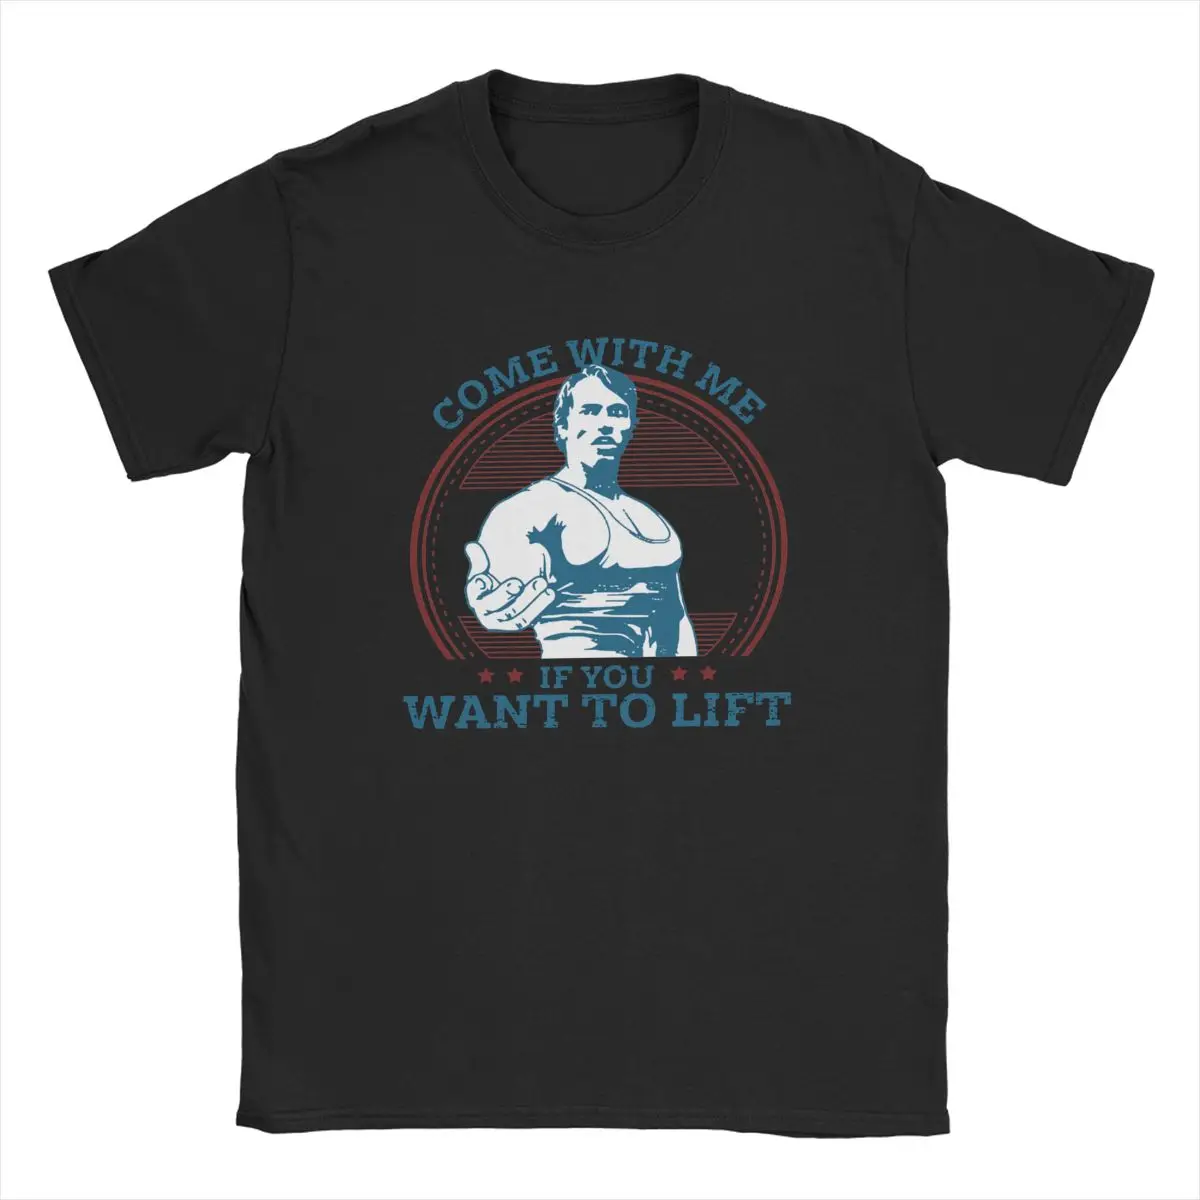 

Arnold Schwarzenegger T Shirts for Men Pure Cotton T-Shirts Come With Me If You Want To Lift Tees Short Sleeve Tops Graphic